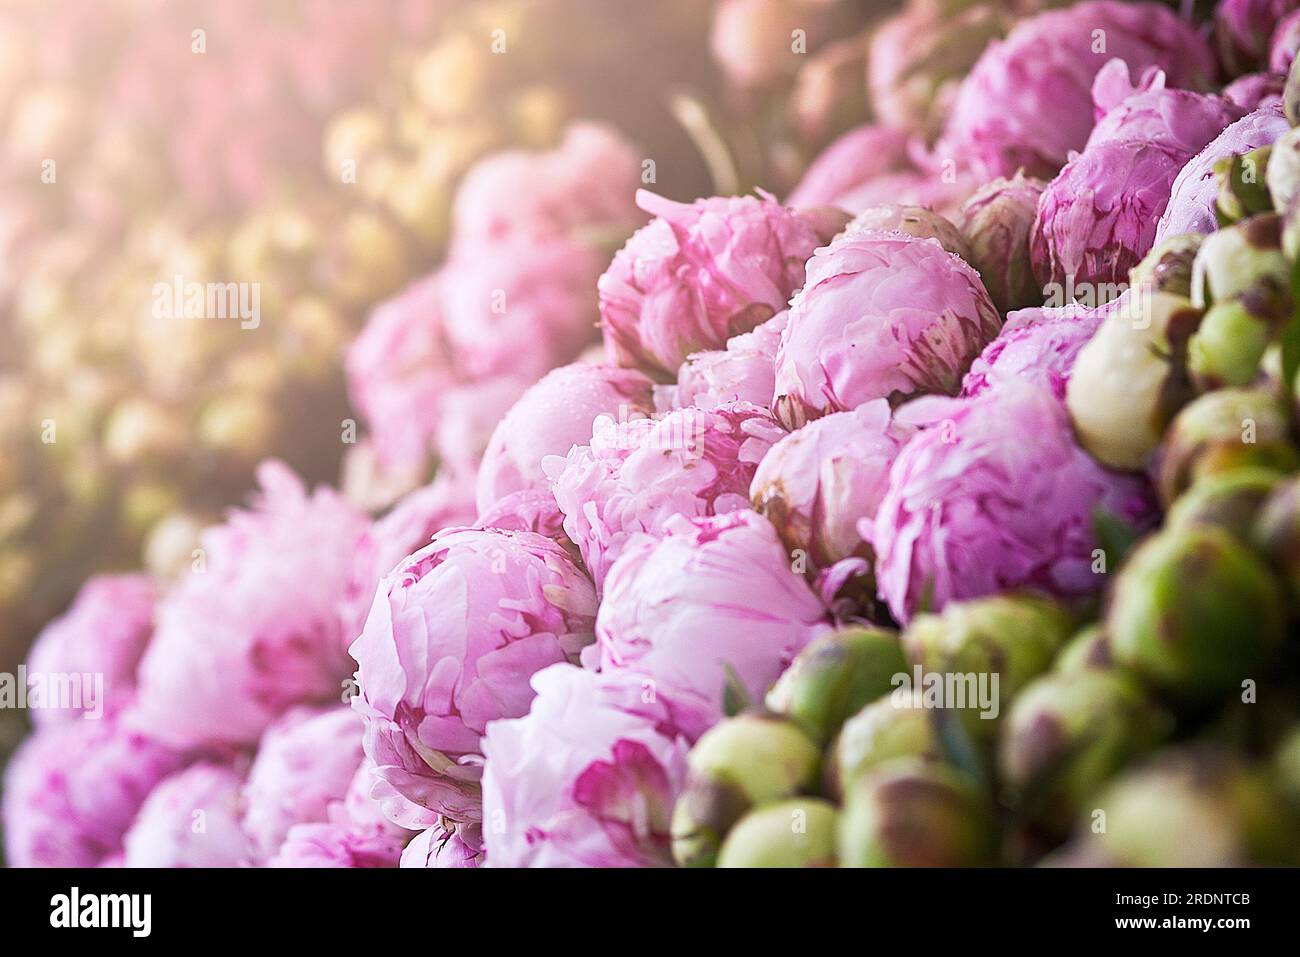 Showcase of flowers, sale of lilac peonies, buds are closed. Stock Photo